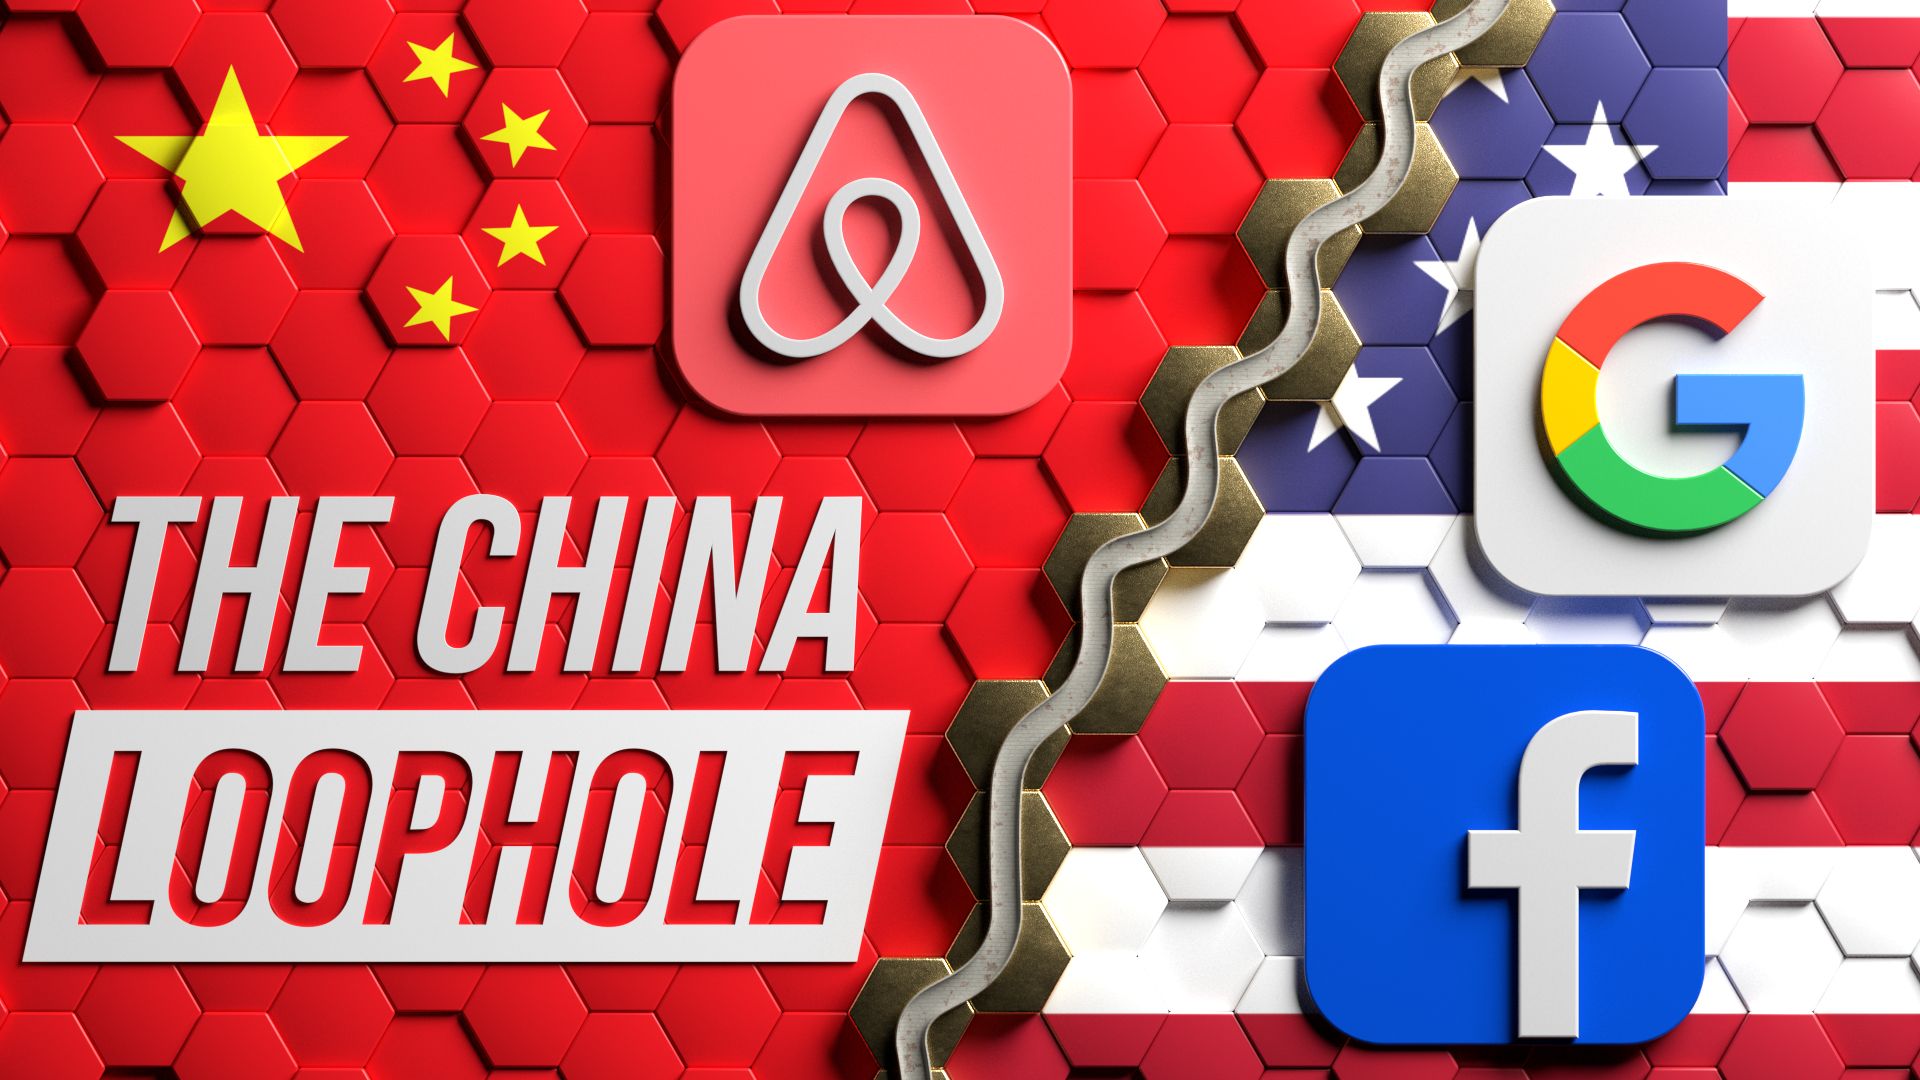 Facebook is banned in China. Google is also banned. But Airbnb isn’t. I wanted to know why China allows Airbnb to operate when it’s banned so many